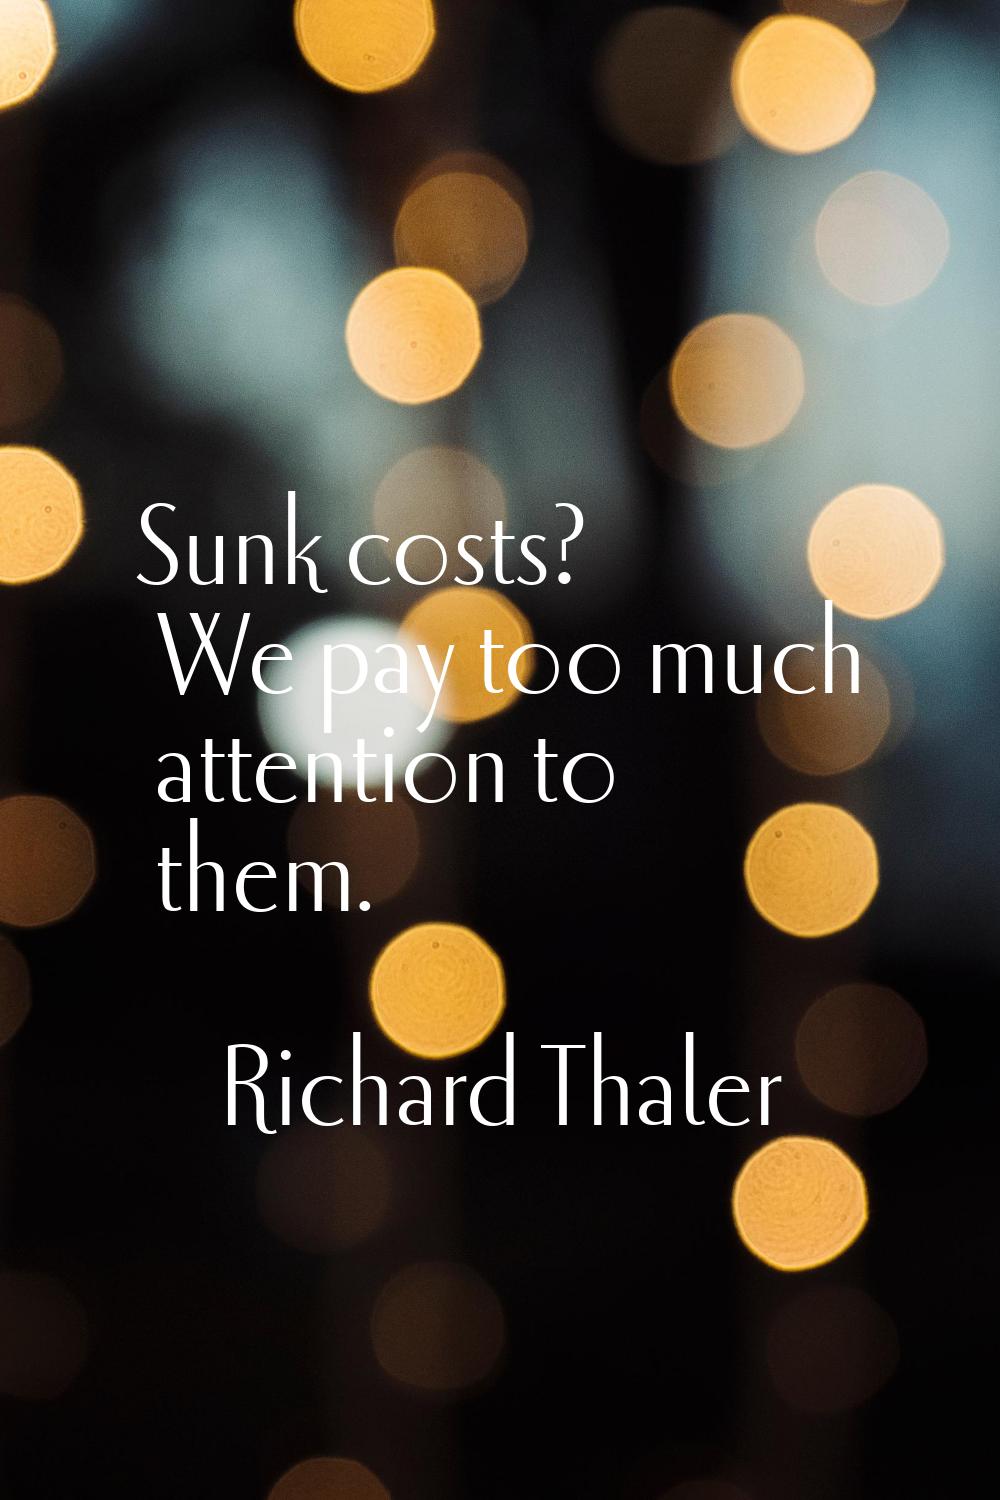 Sunk costs? We pay too much attention to them.